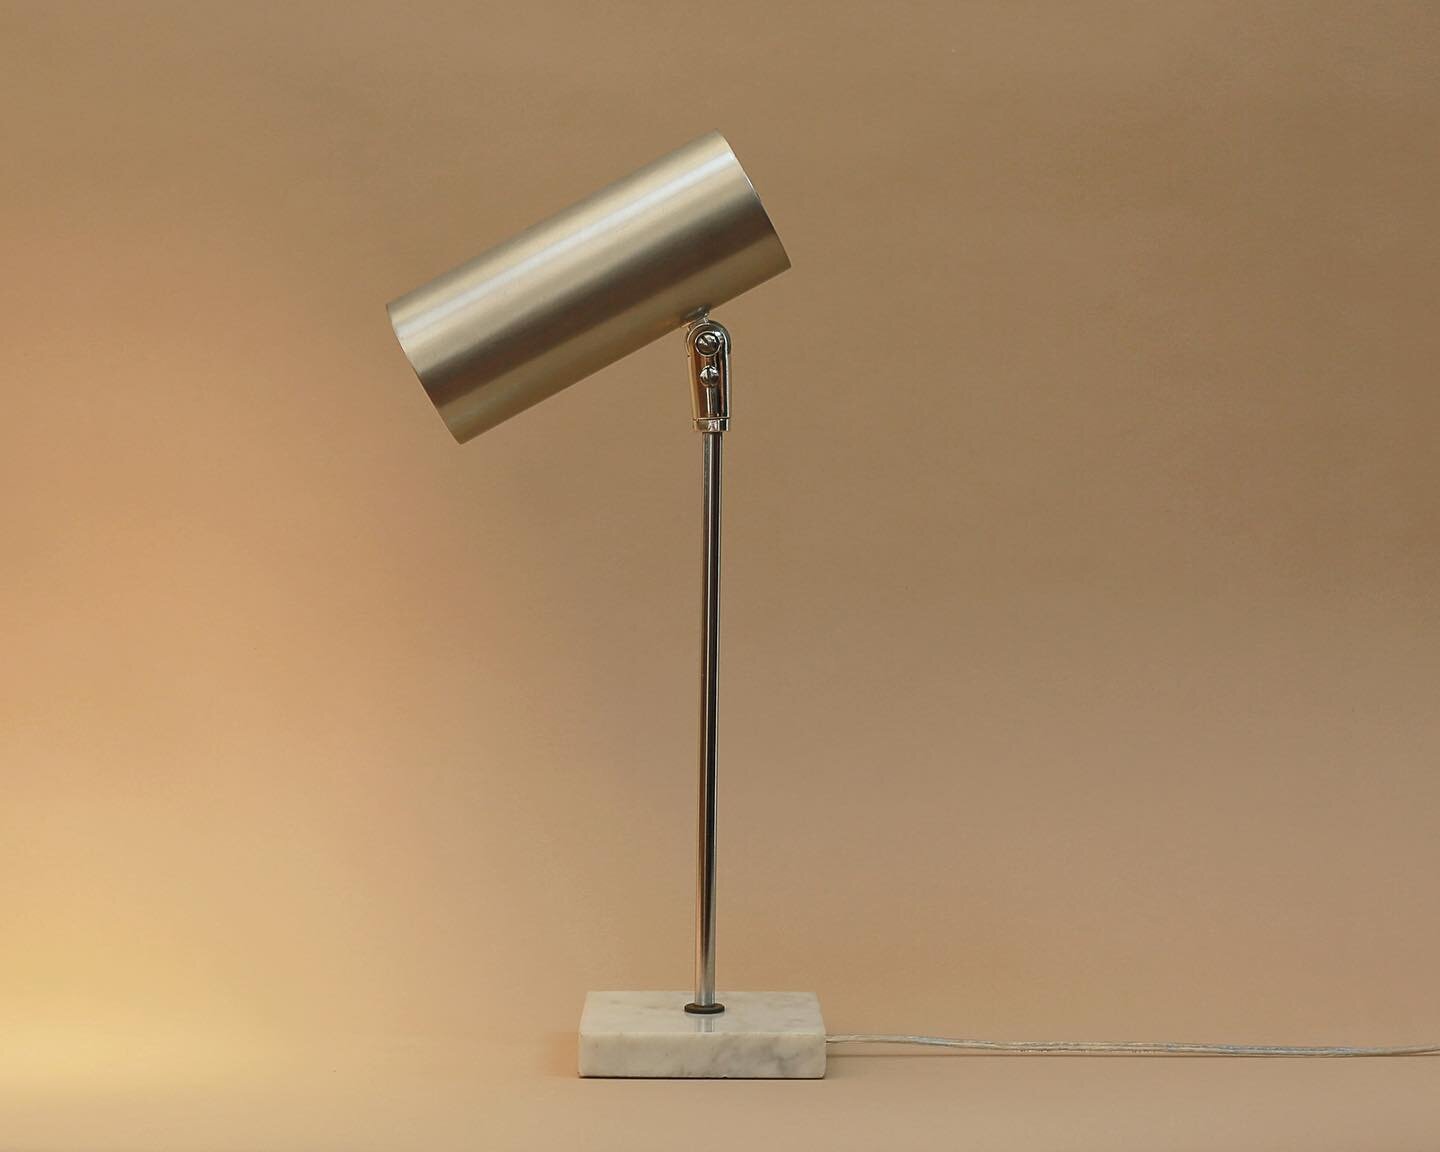 Vintage marble, chrome and aluminum desk lamp, 1970s. Attributed to Koch and Lowy. Find her on @1stdibs auctions. Link in Bio.

#vintagelighting